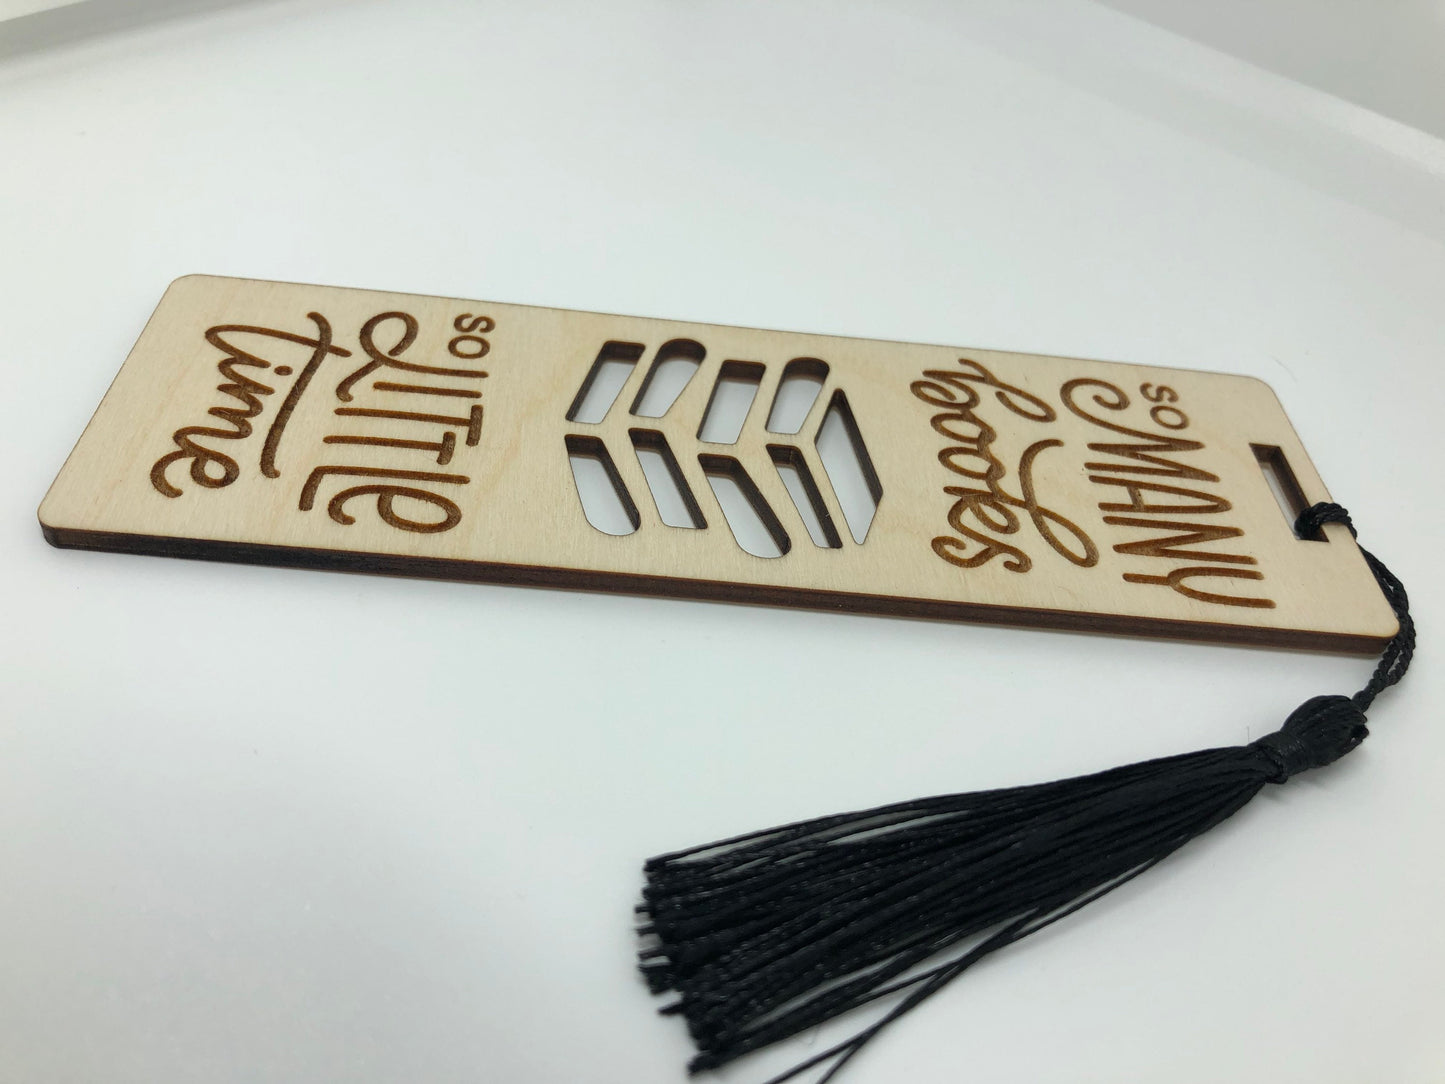 So many books so little time Engraved Wooden Bookmark